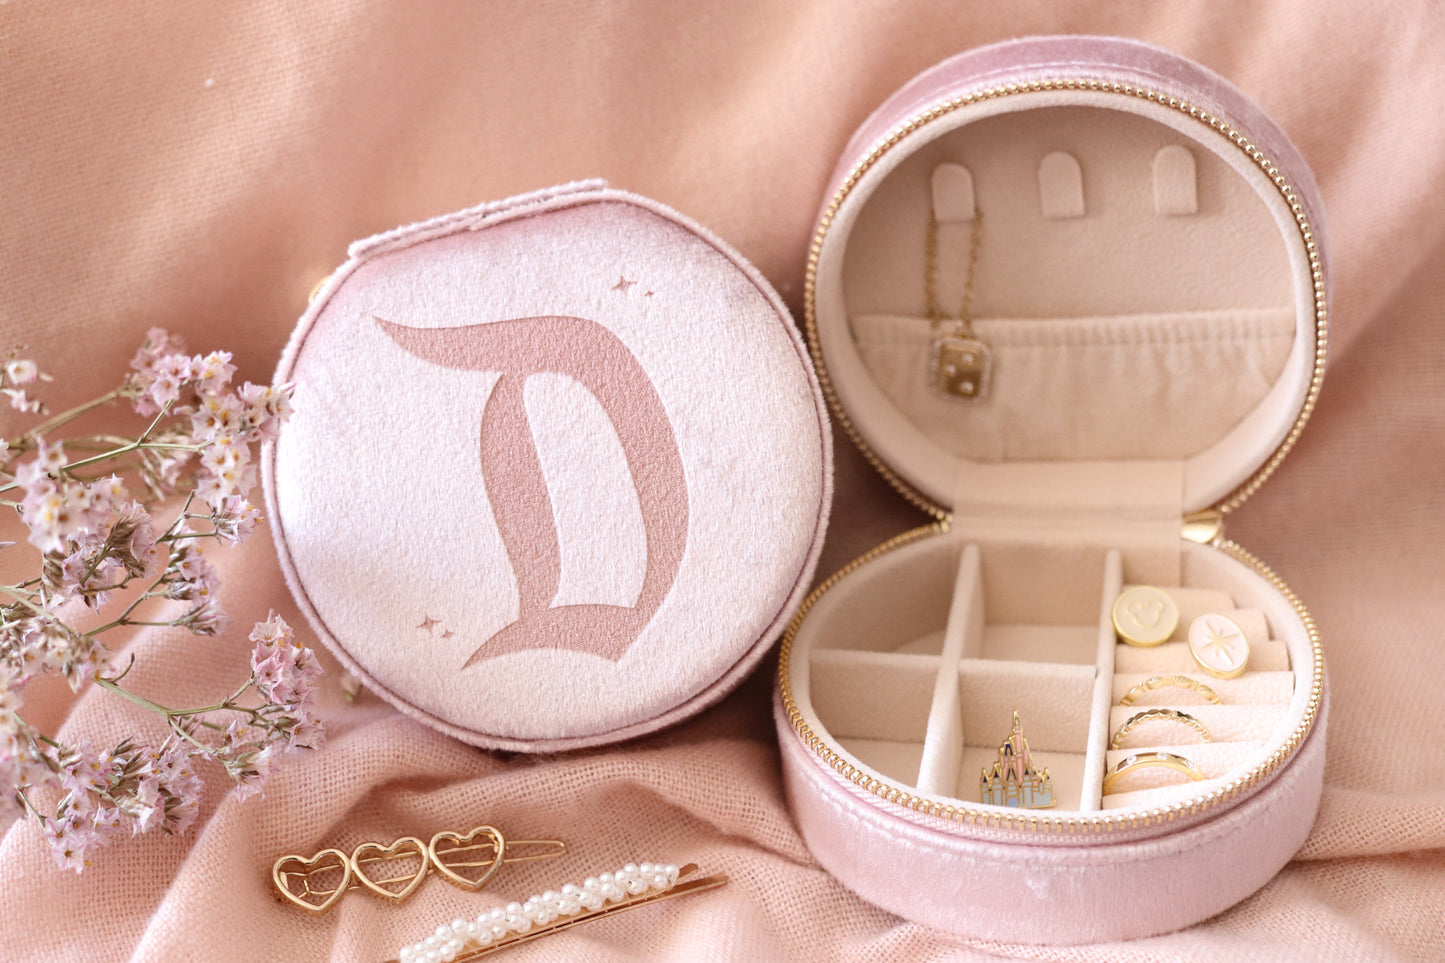 LETTER JEWELRY CASE